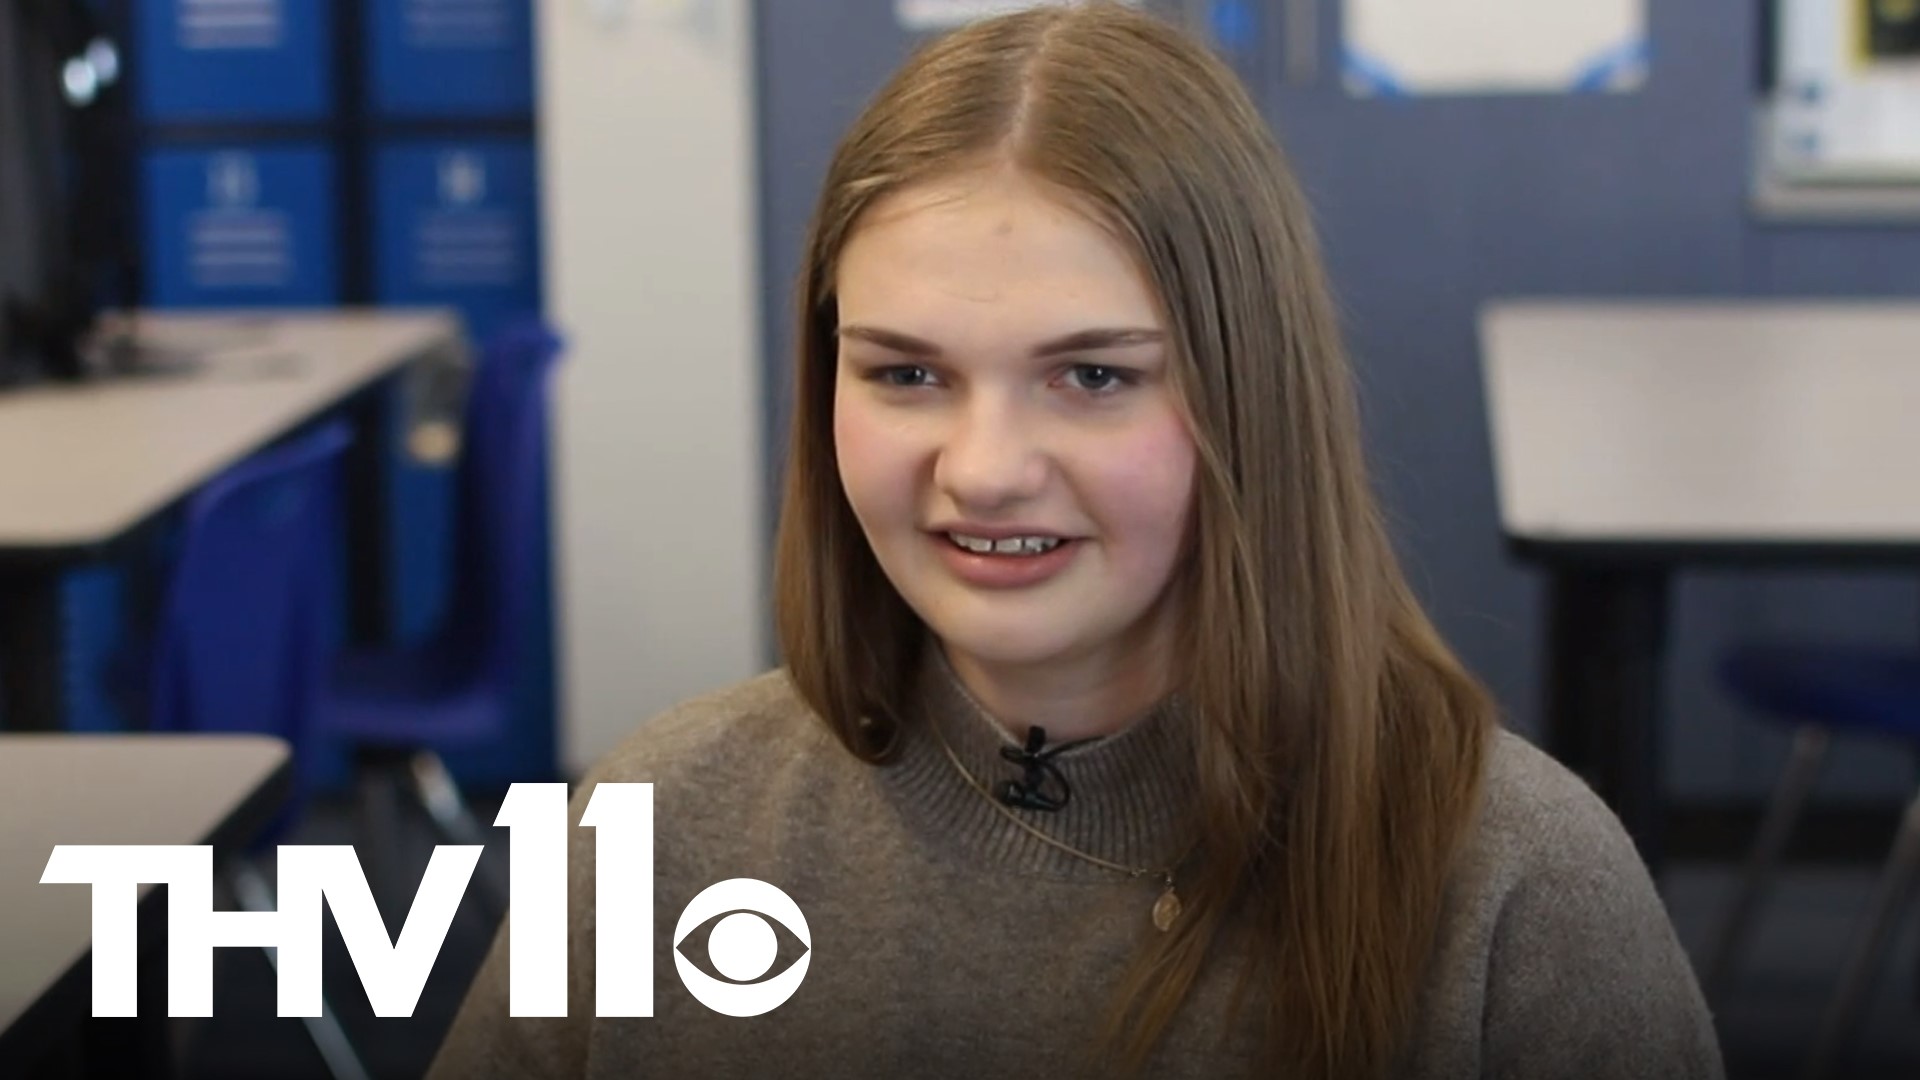 An Ukrainian exchange student at Sylvan Hills High School said she checks in with her parents every five hours as the Russia invasion continues in Ukraine.